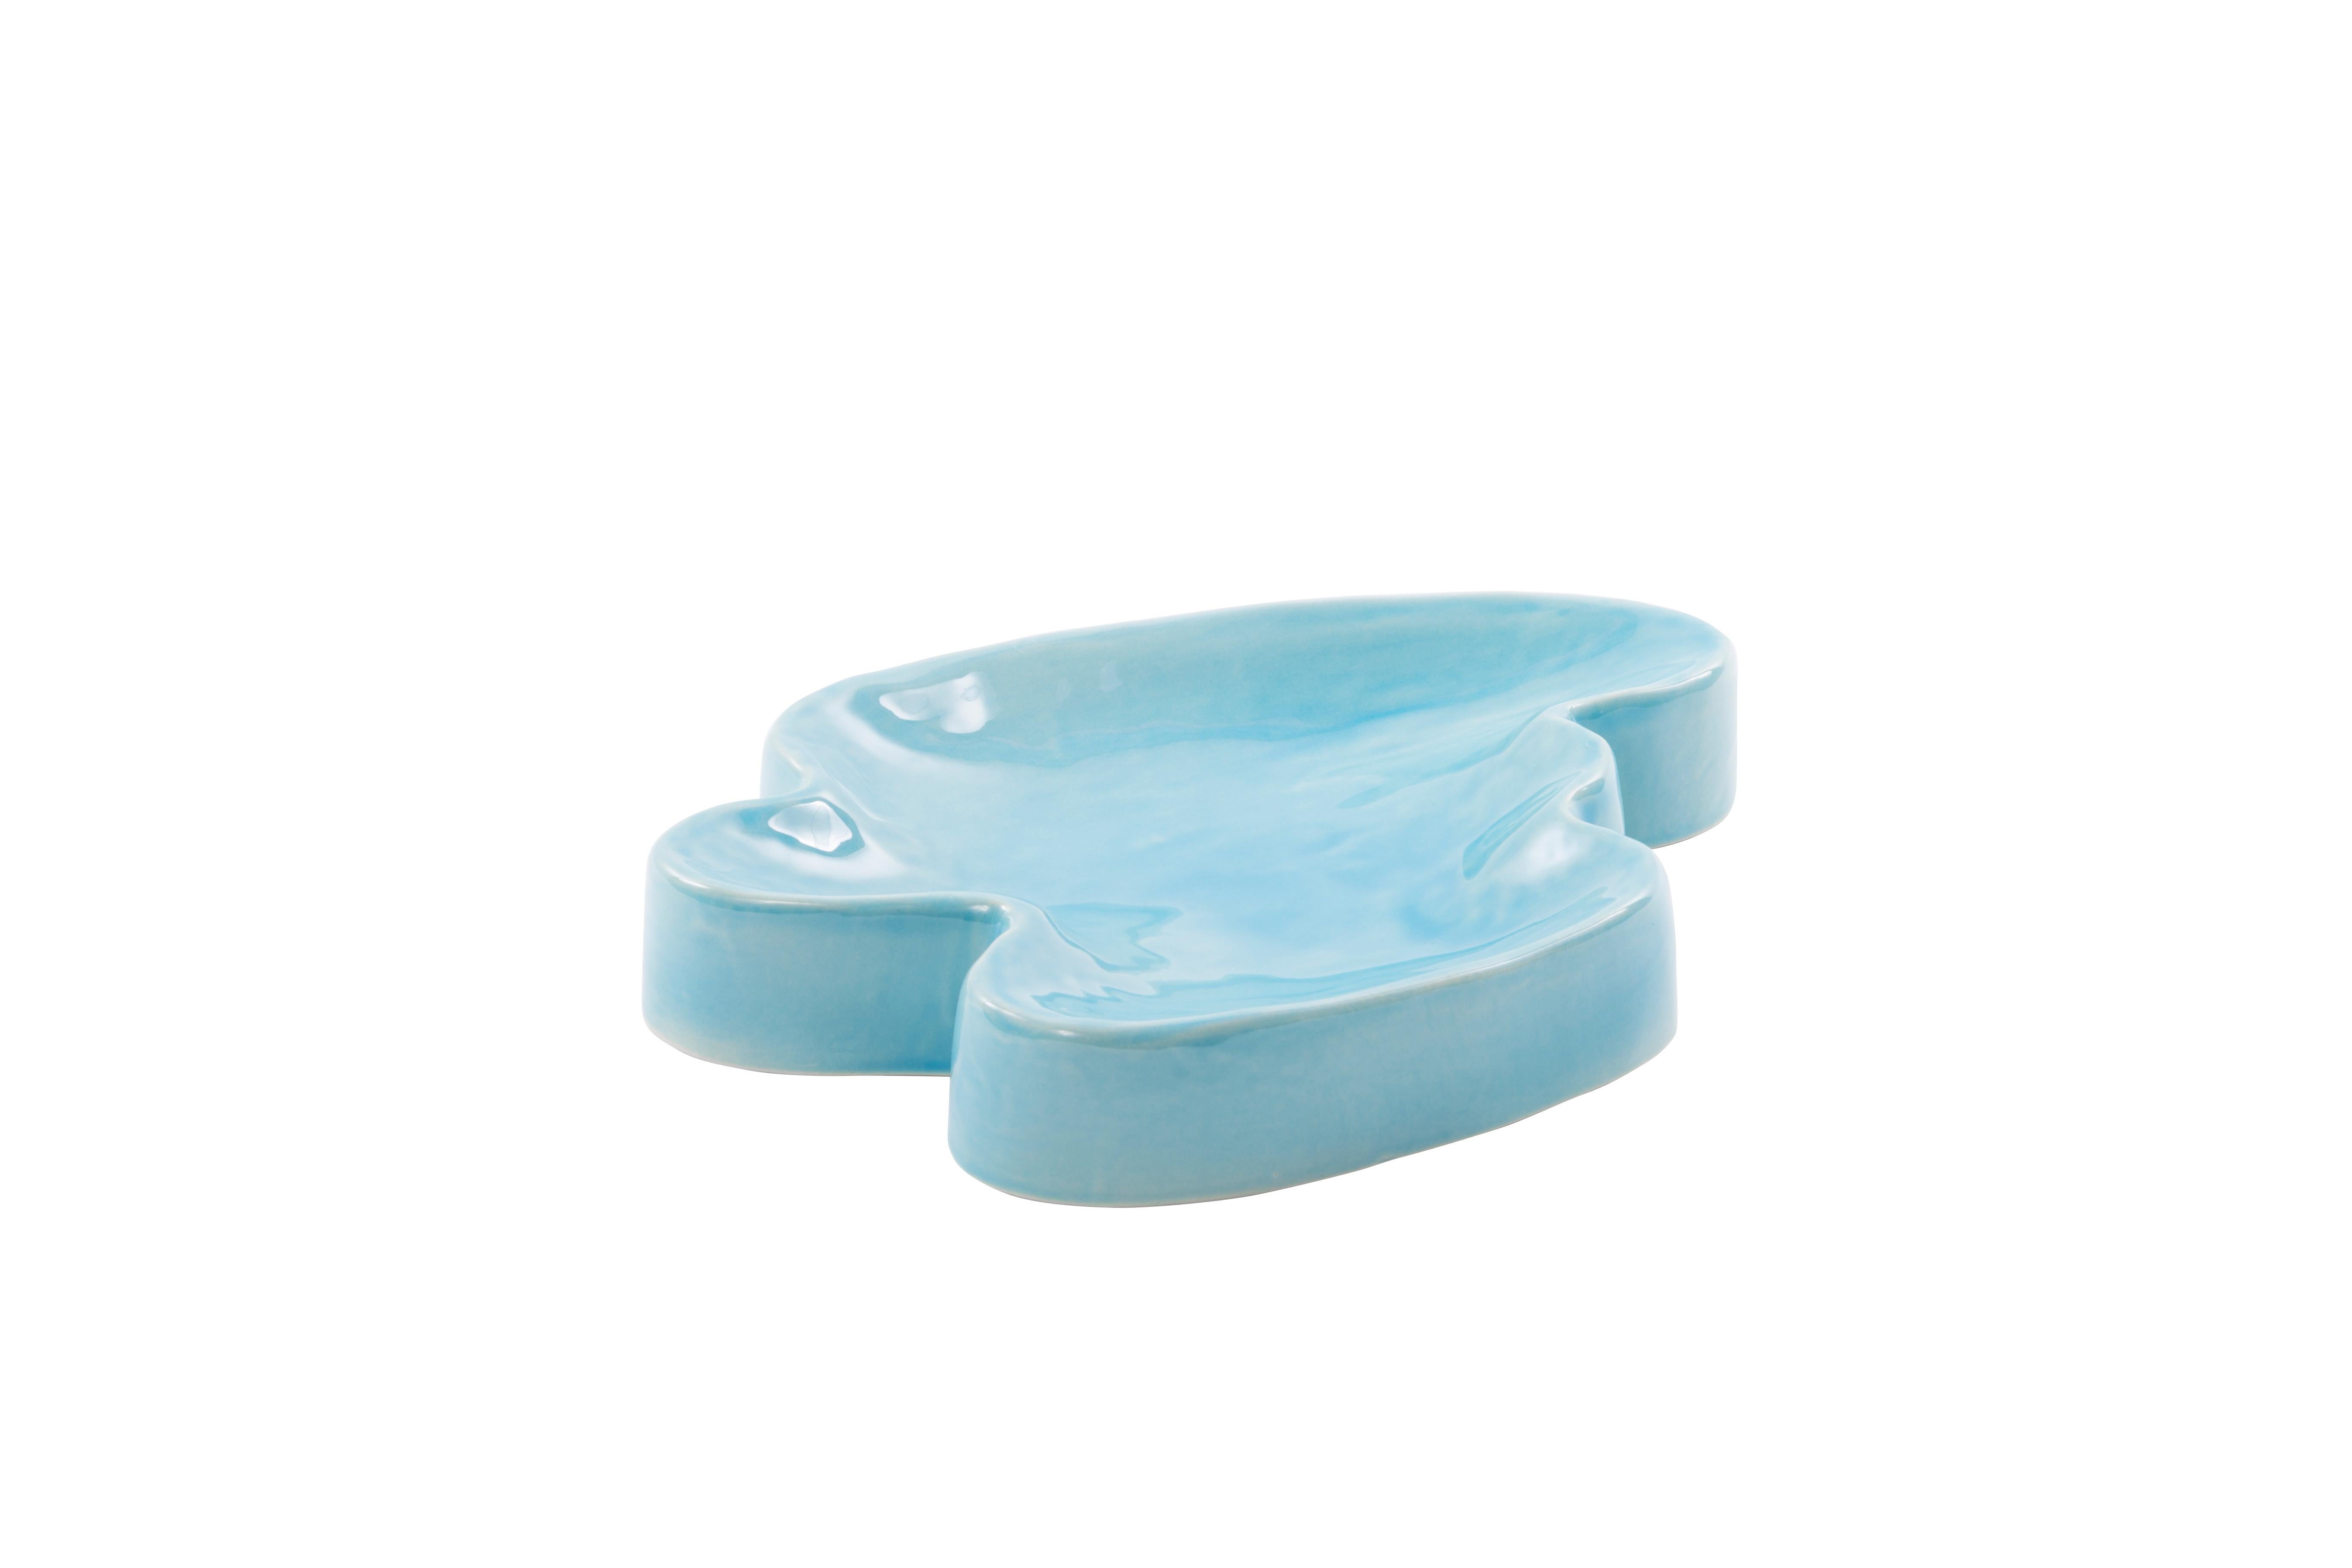 Lake small tropical Turquoise tray by Pulpo.
Dimensions: D 27 x W 20 x H 4 cm
Materials: Ceramic

Also available in different colours.

These charming additions allow you to create a true tablescape environment; from the tones and textures of